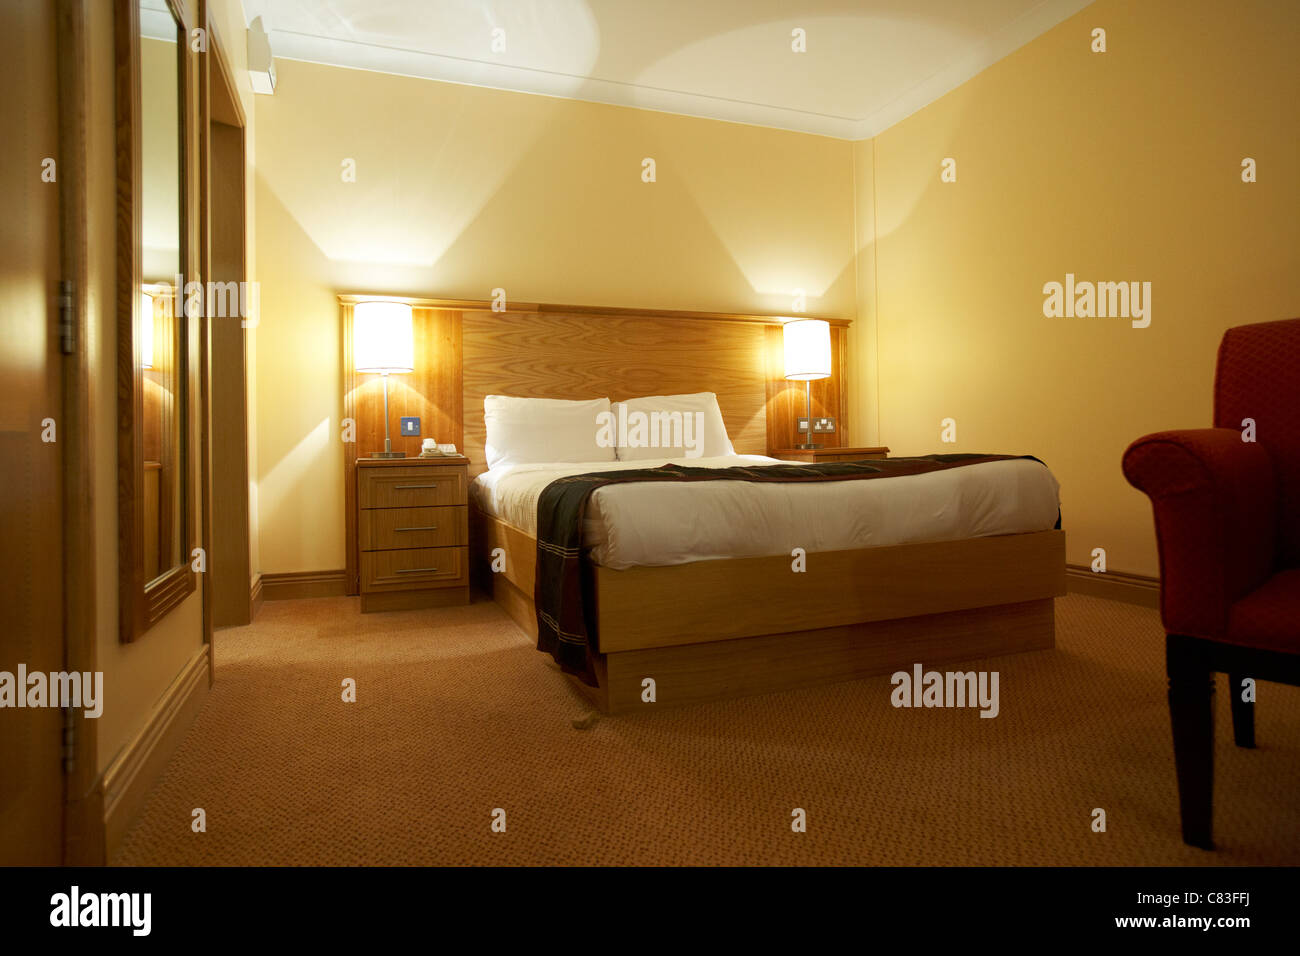 interior of a 4 star hotel bedroom with double bed Stock Photo - Alamy